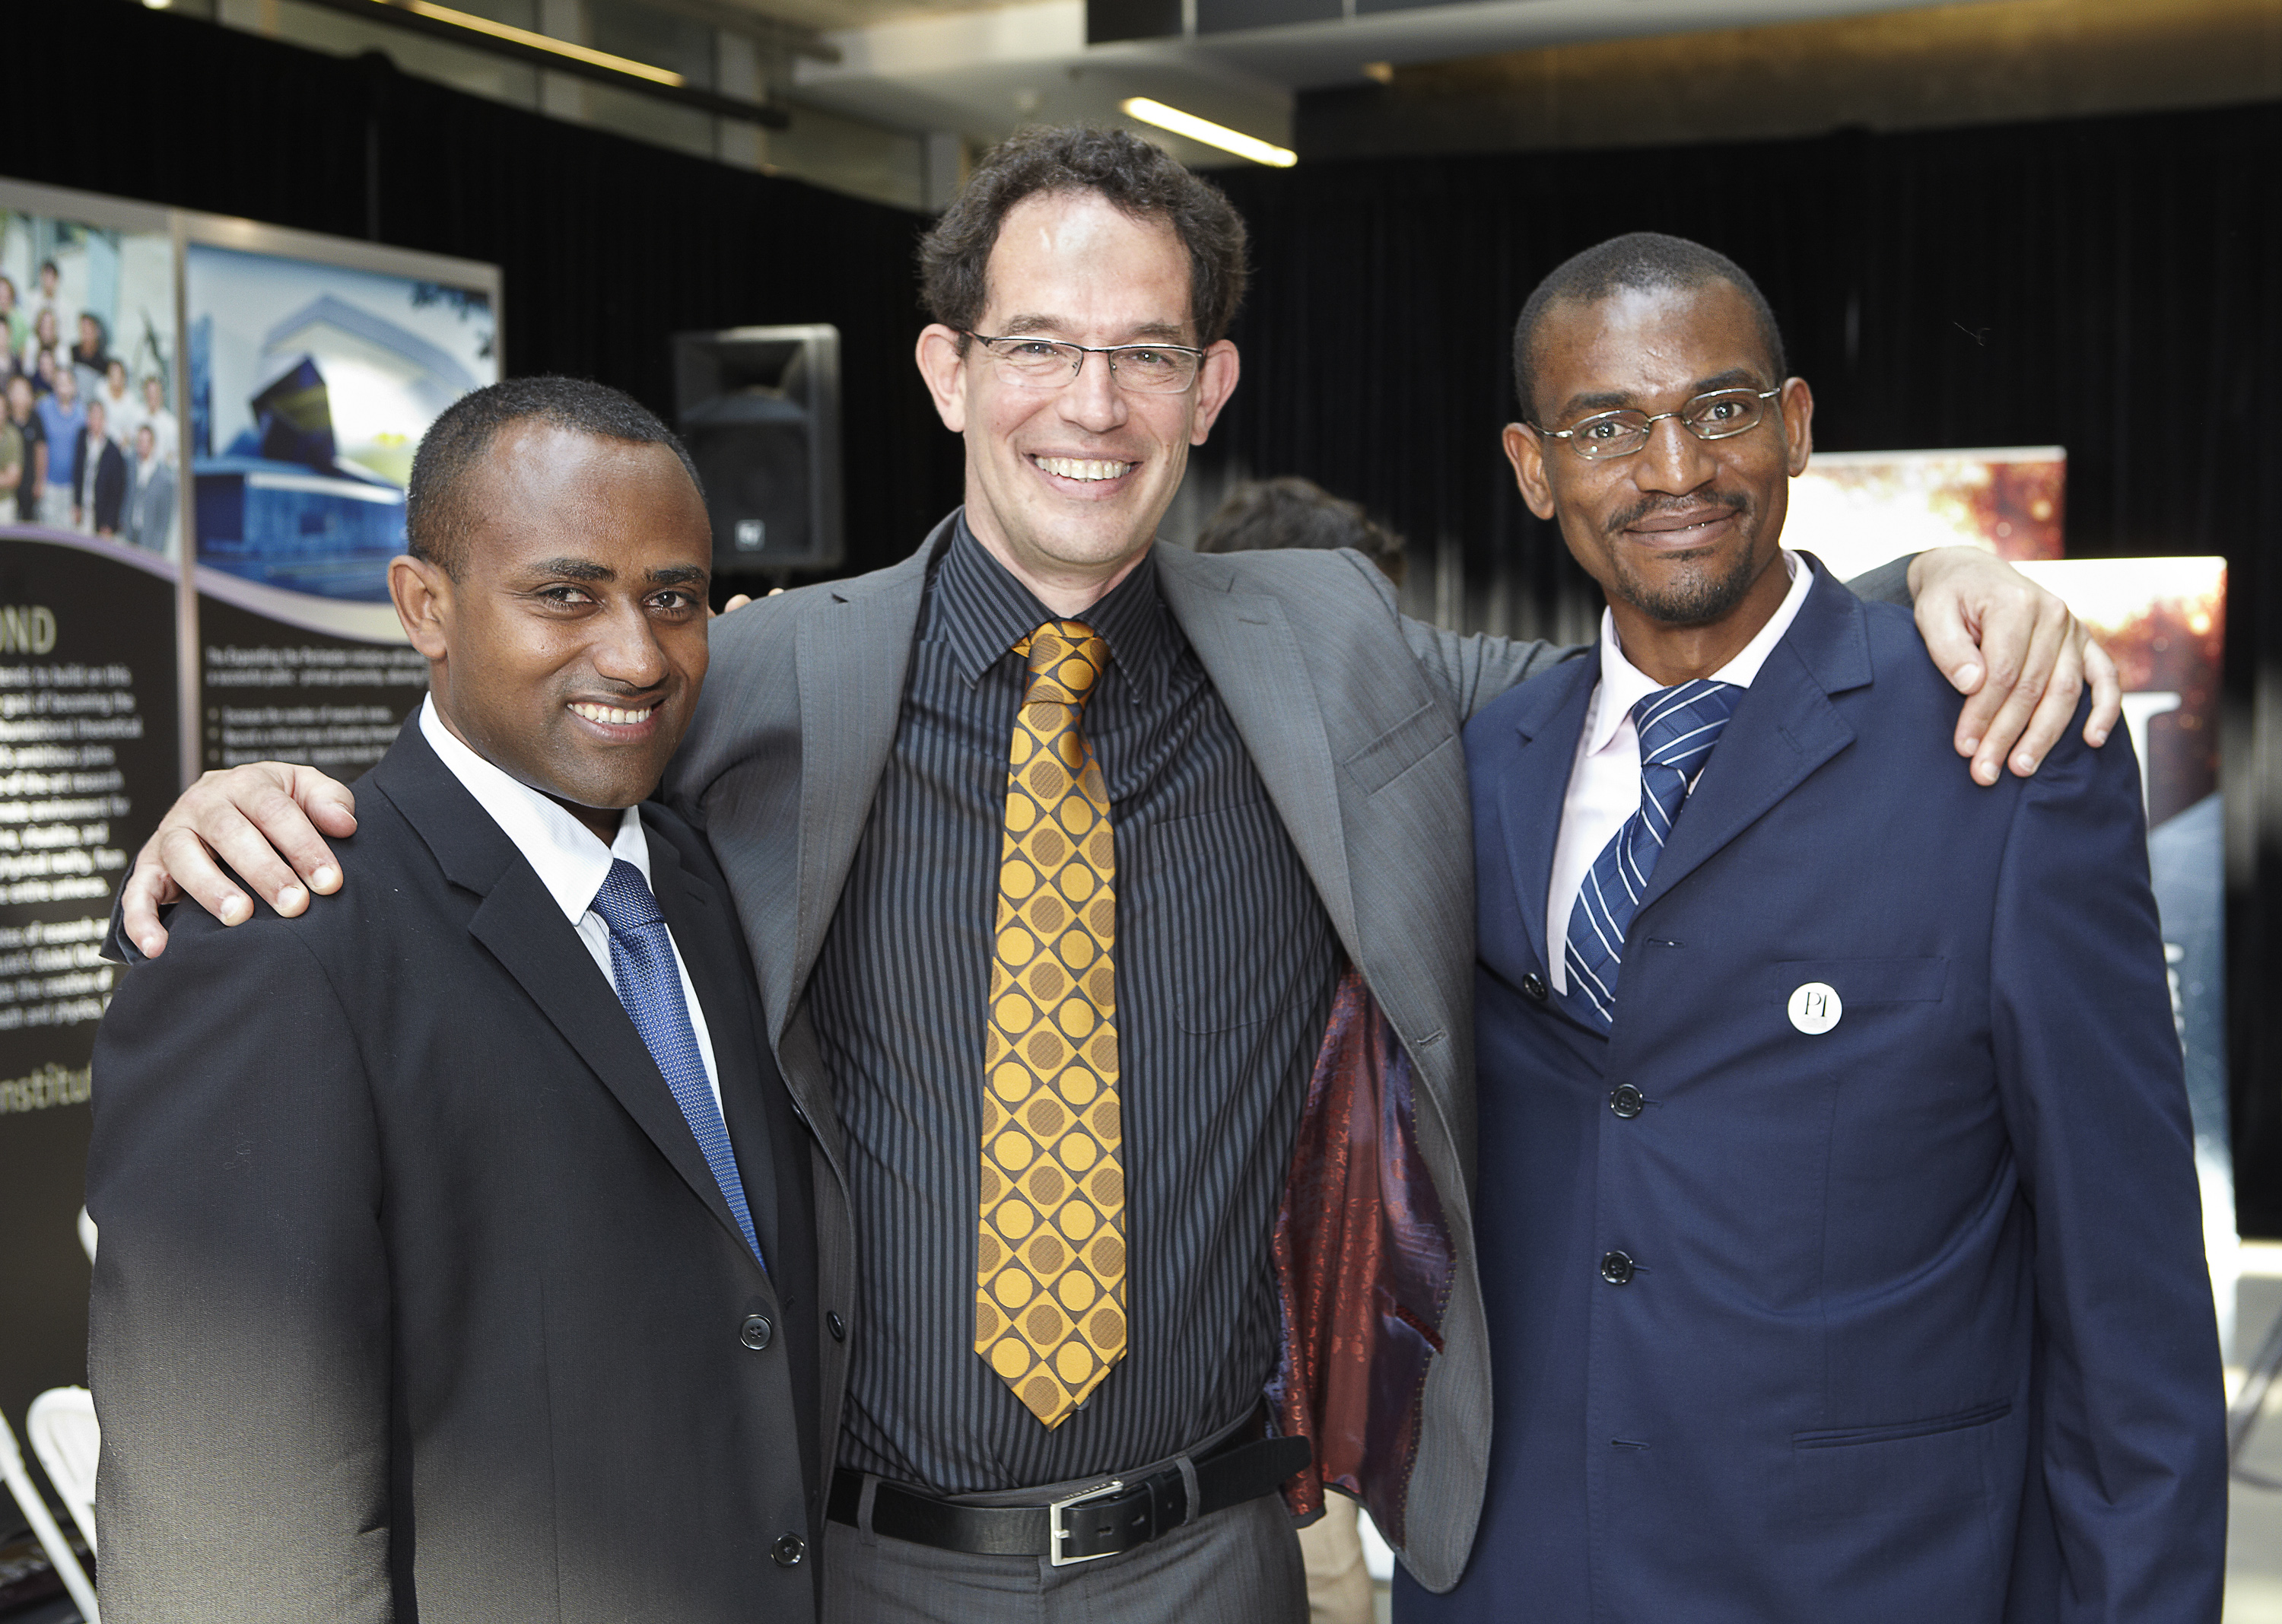 Neil Tuork posing with two AIMS alumni at the Global Outreach announcement with Prime Minister Stephen Harper